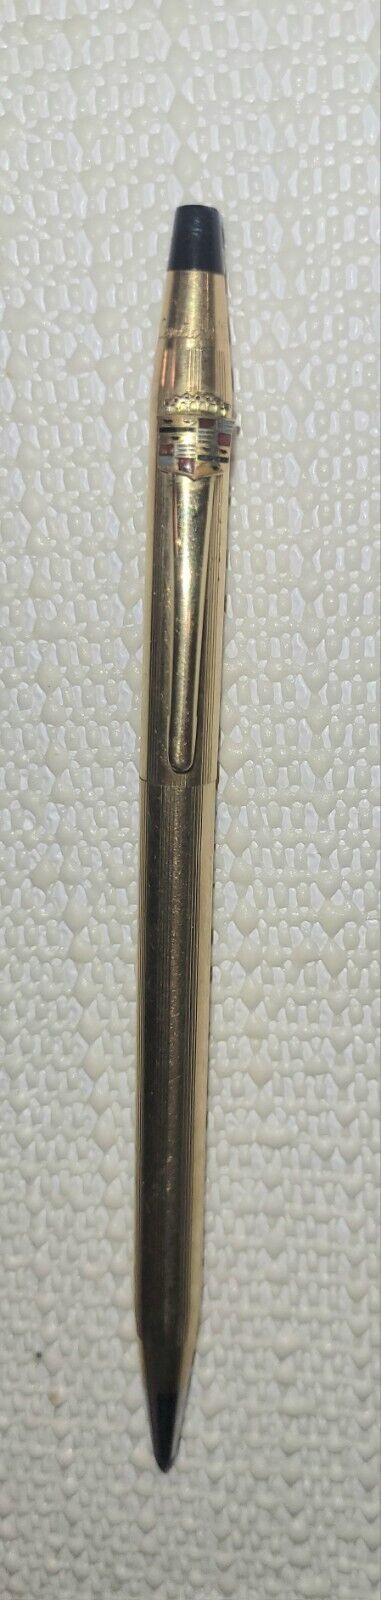 Vintage Cross Century Classic 12kt Gold Filled Pen Advertising Cadillac